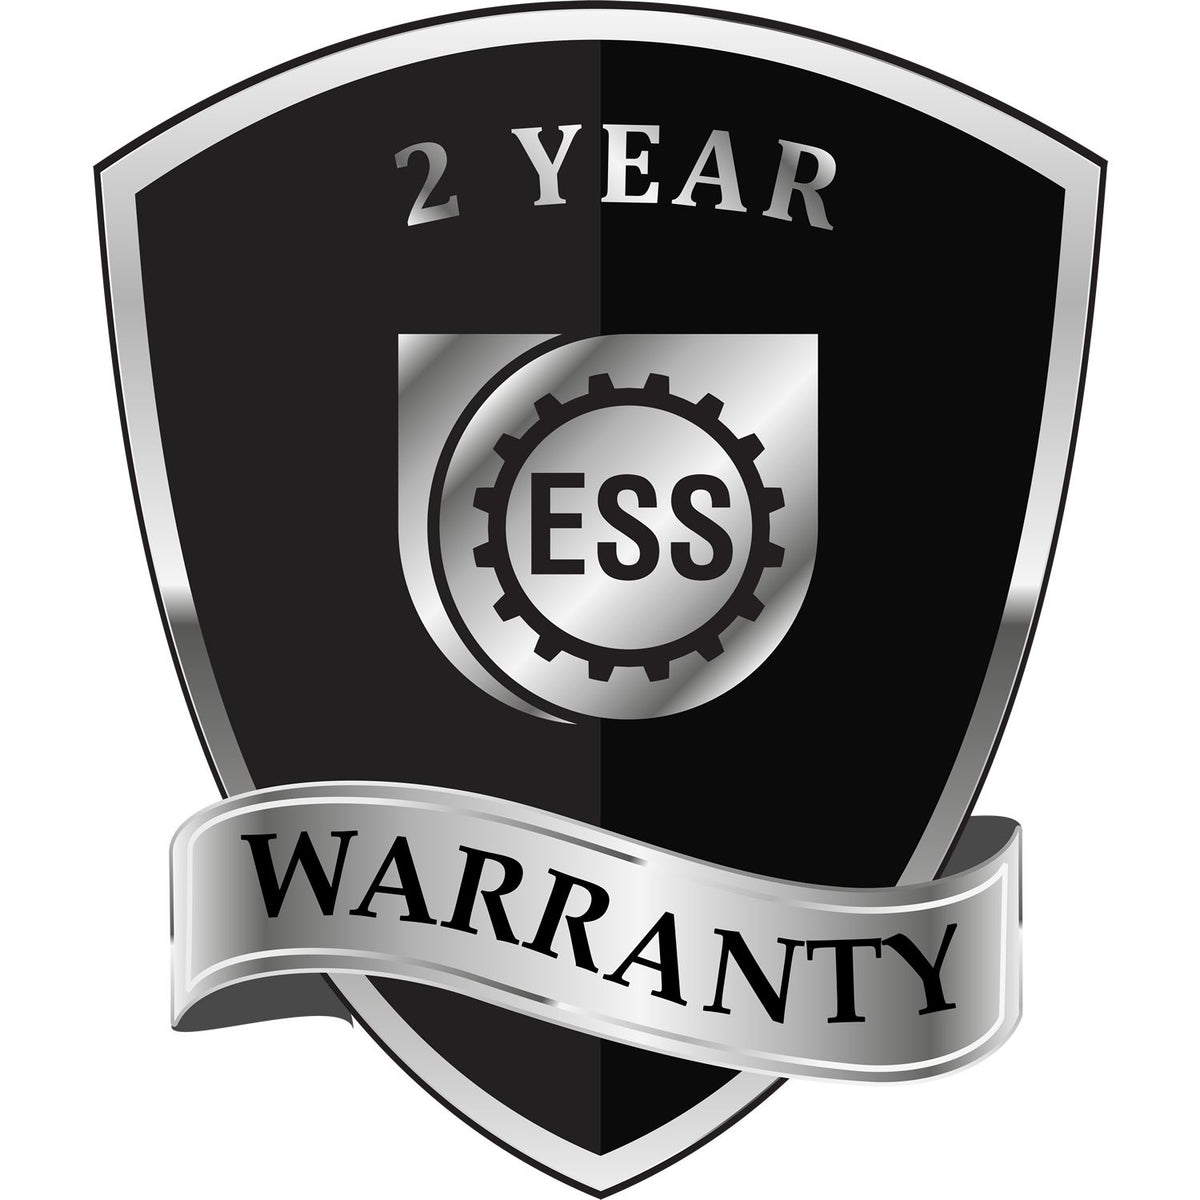 A black and silver badge or emblem showing warranty information for the State of Ohio Extended Long Reach Geologist Seal